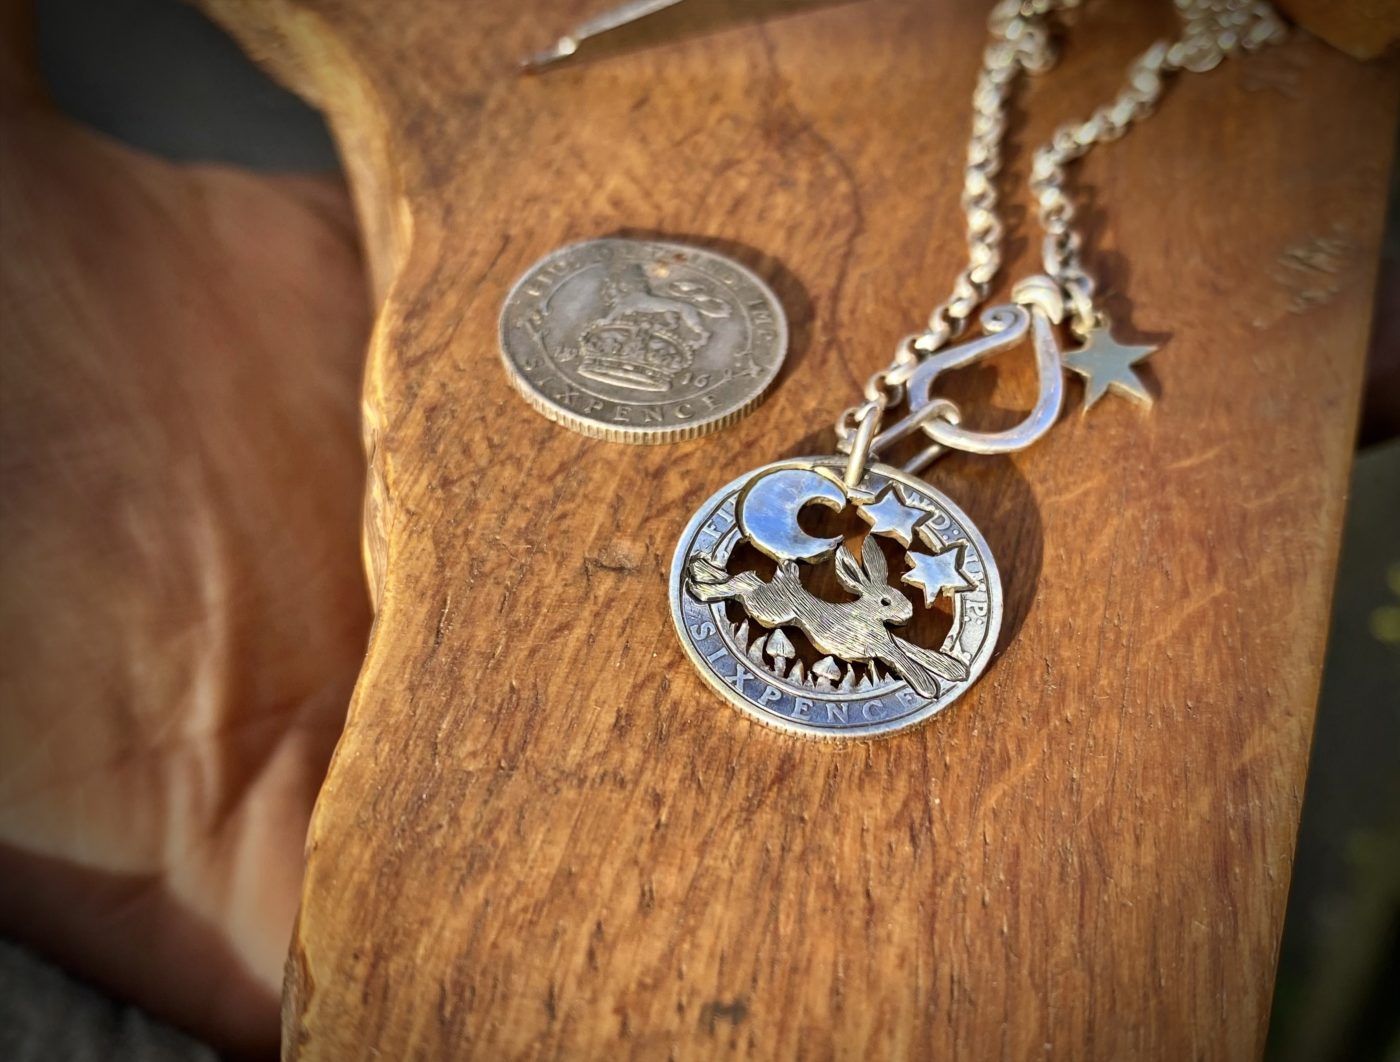 Handcrafted and recycled silver sixpence coin leaping hare pendant necklace